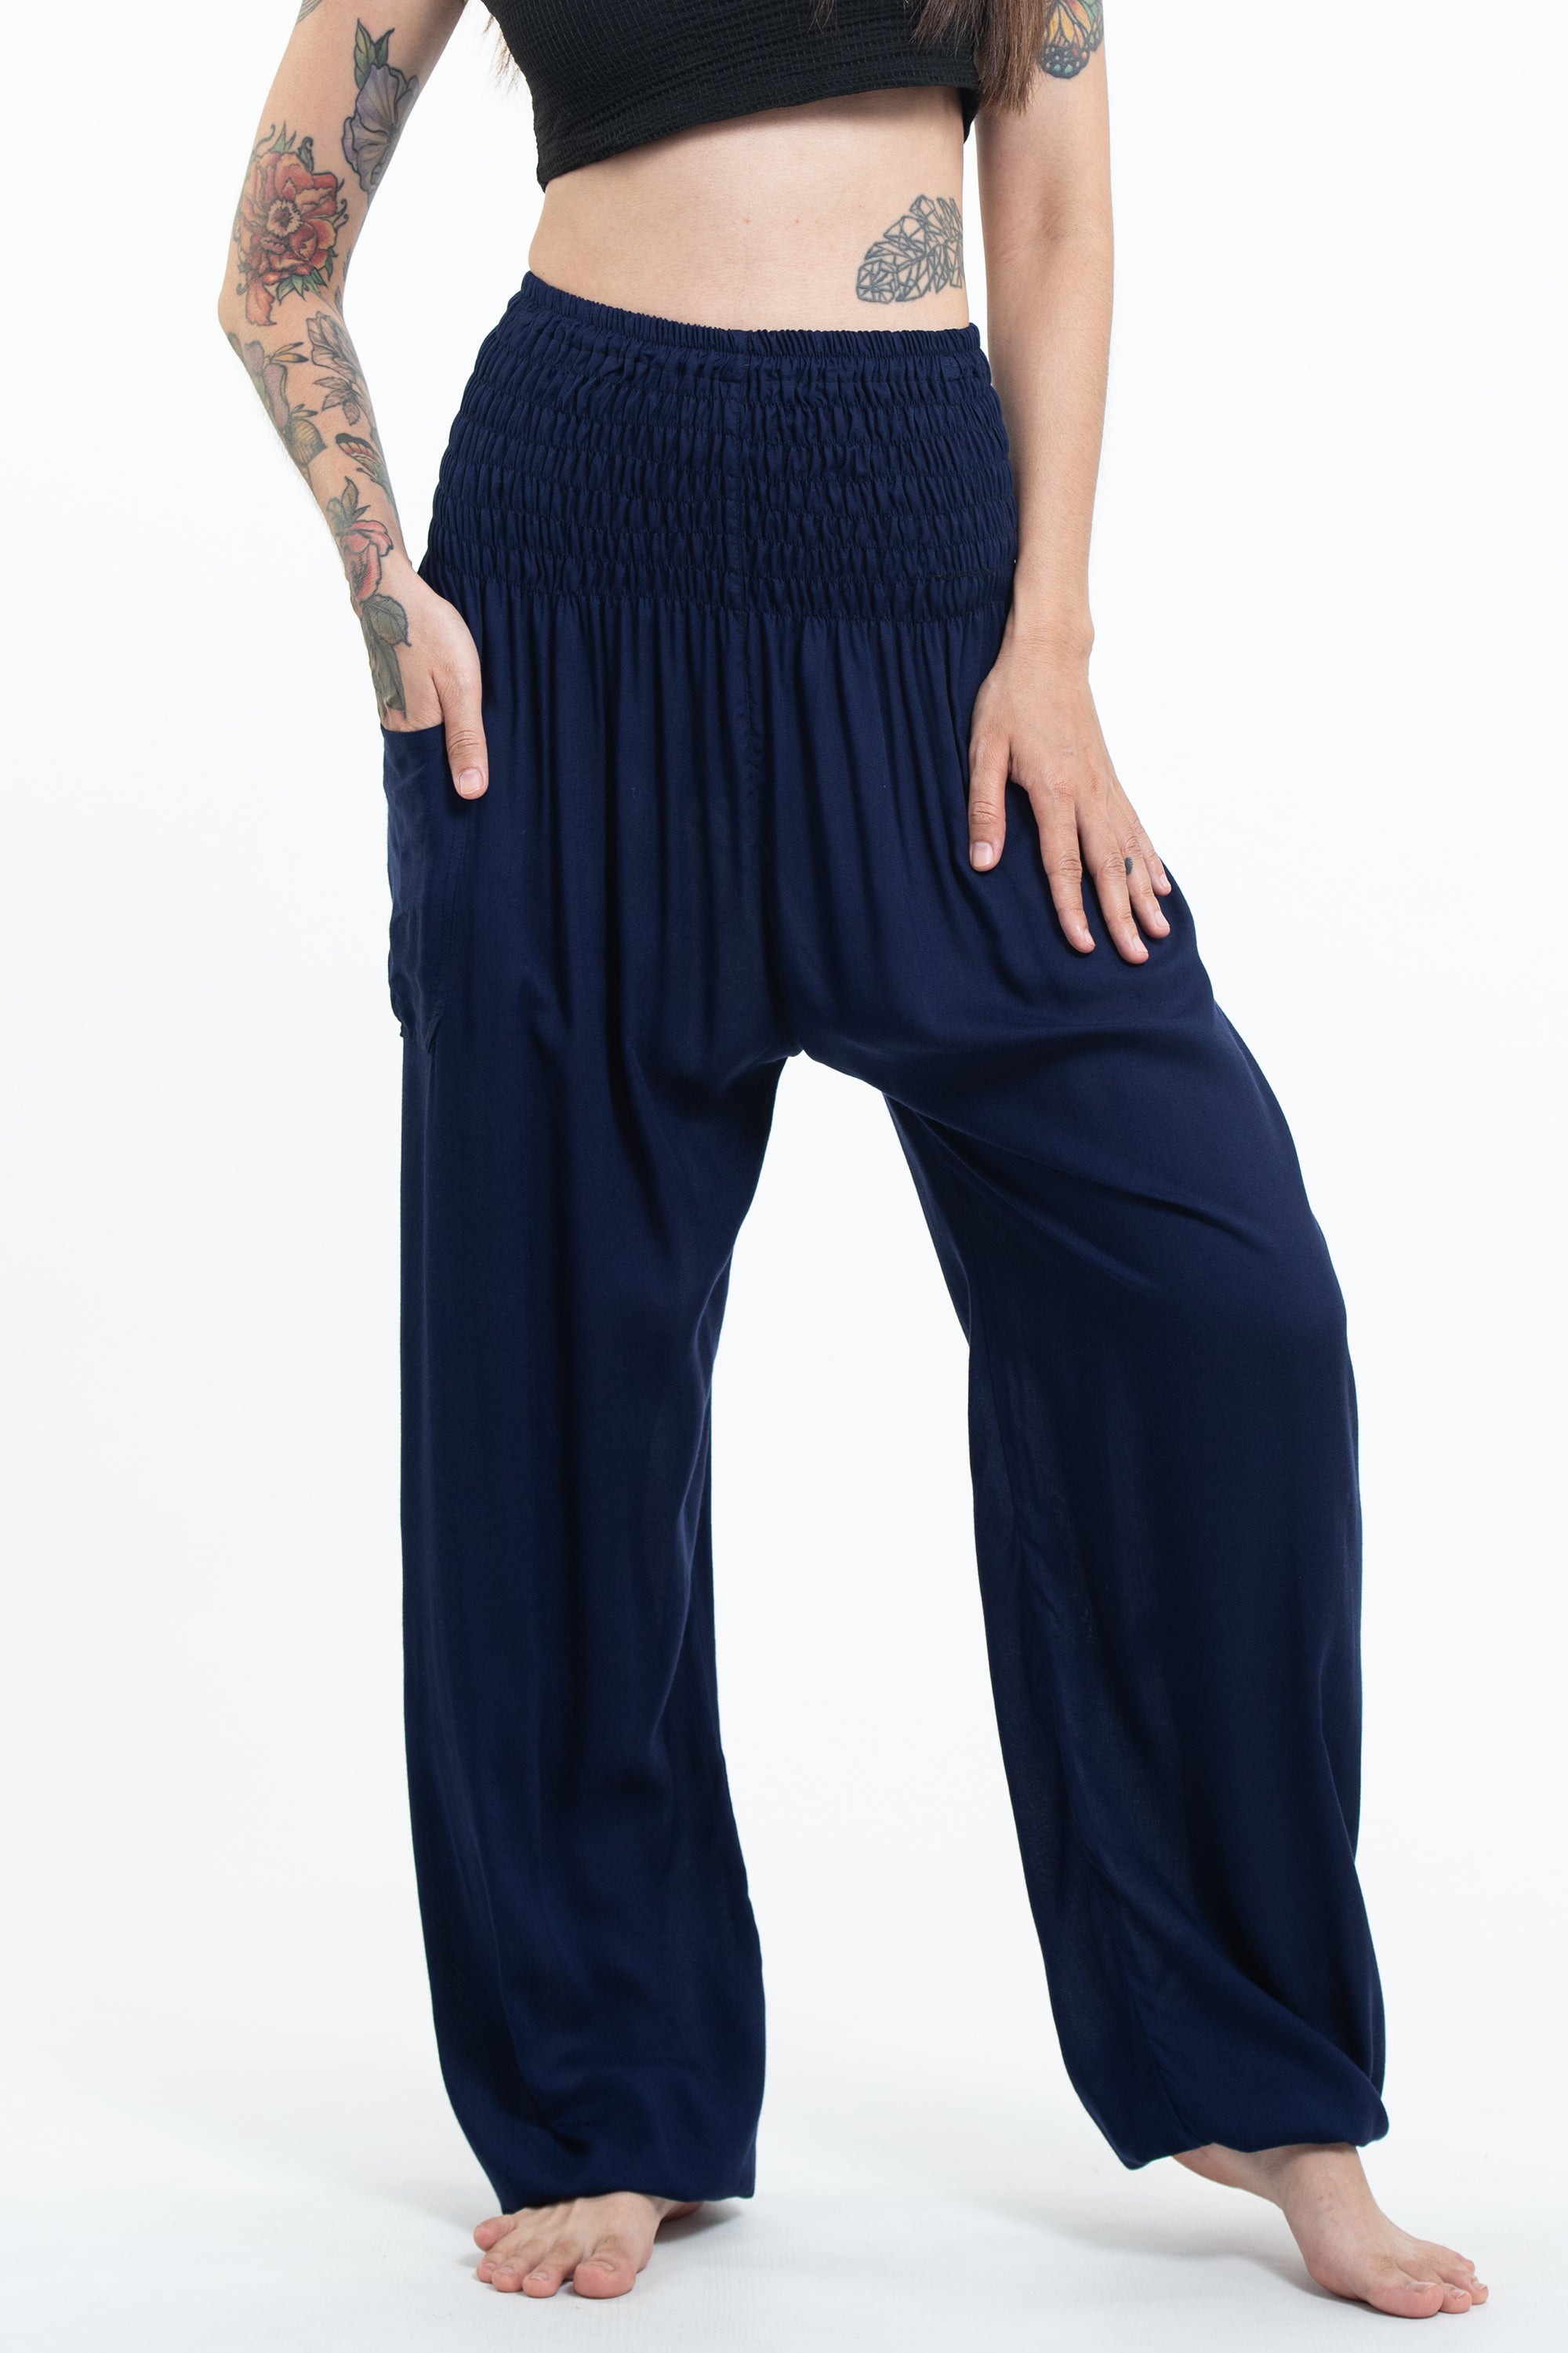 Solid Color Women's Tall Harem Pants in Blue